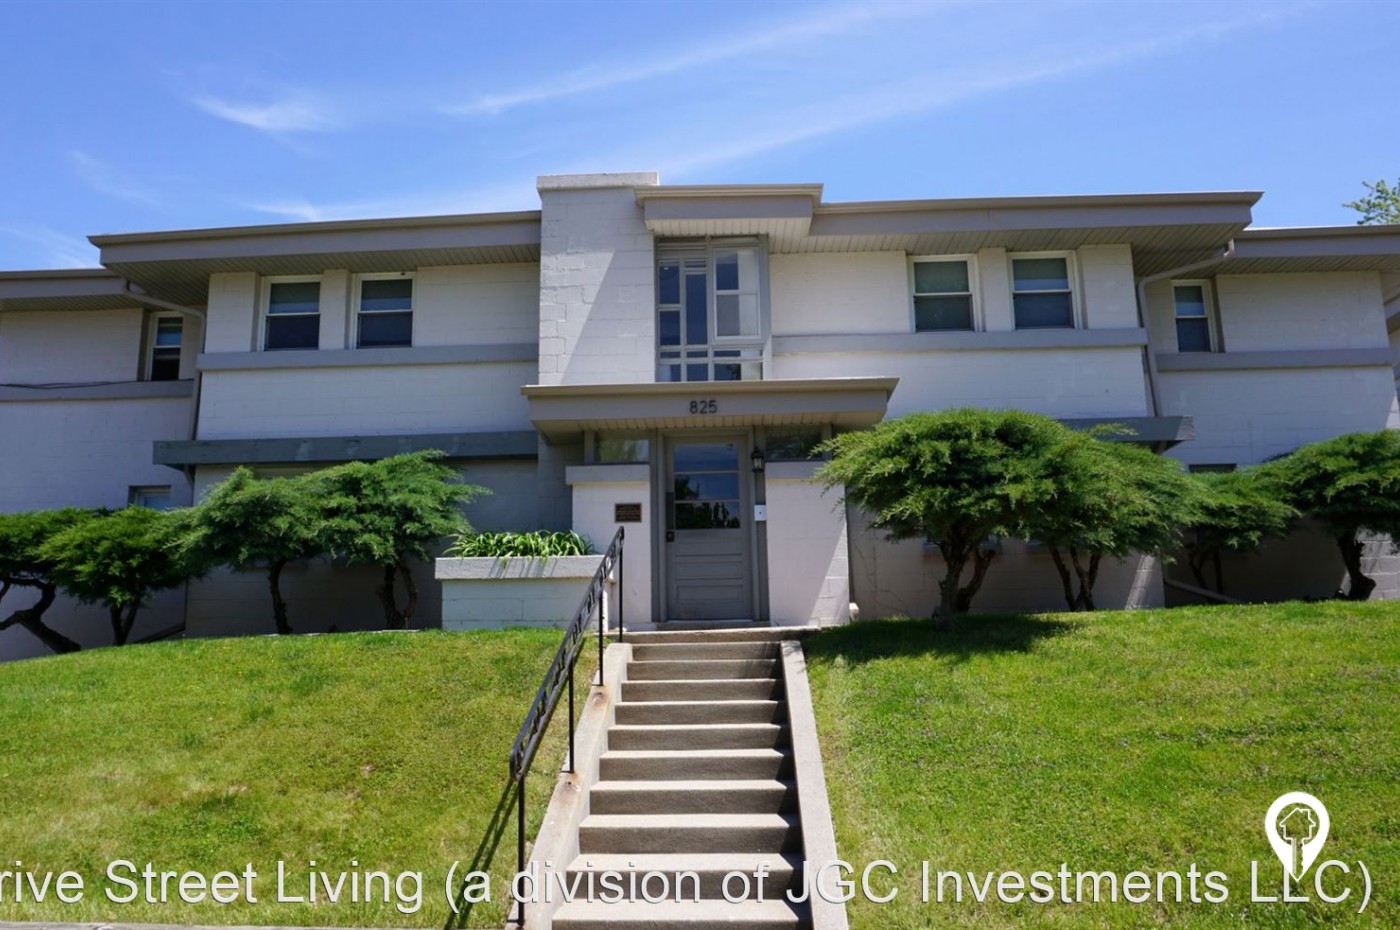 Thrive Street Living (a division of JGC Investments LLC) - Marcy Court Apartments